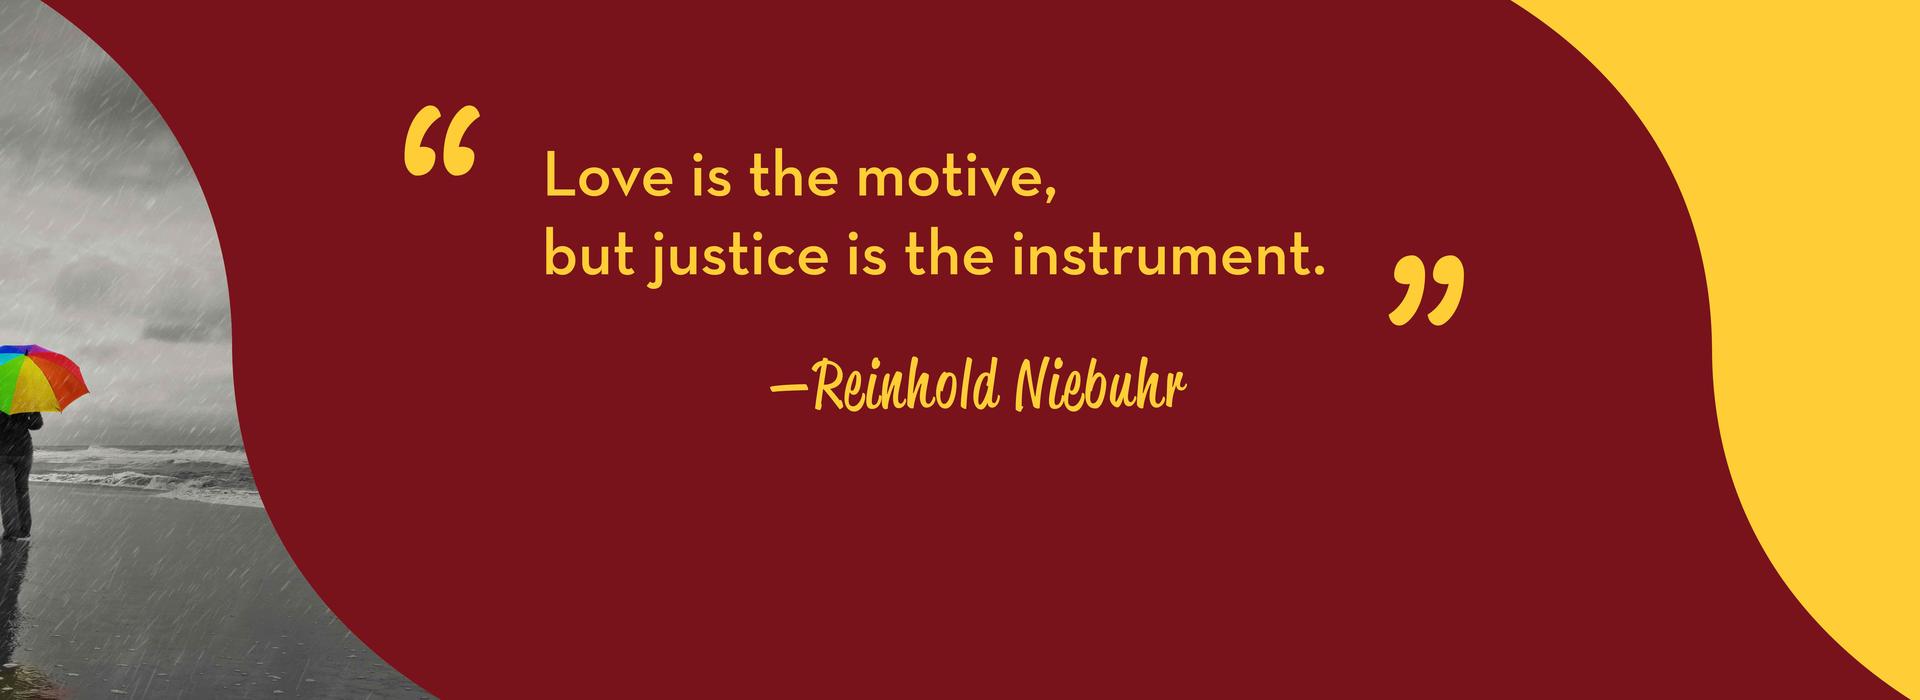 Quote: Love is the motive, but justice is the instrument. by Reinhold Niebuhr